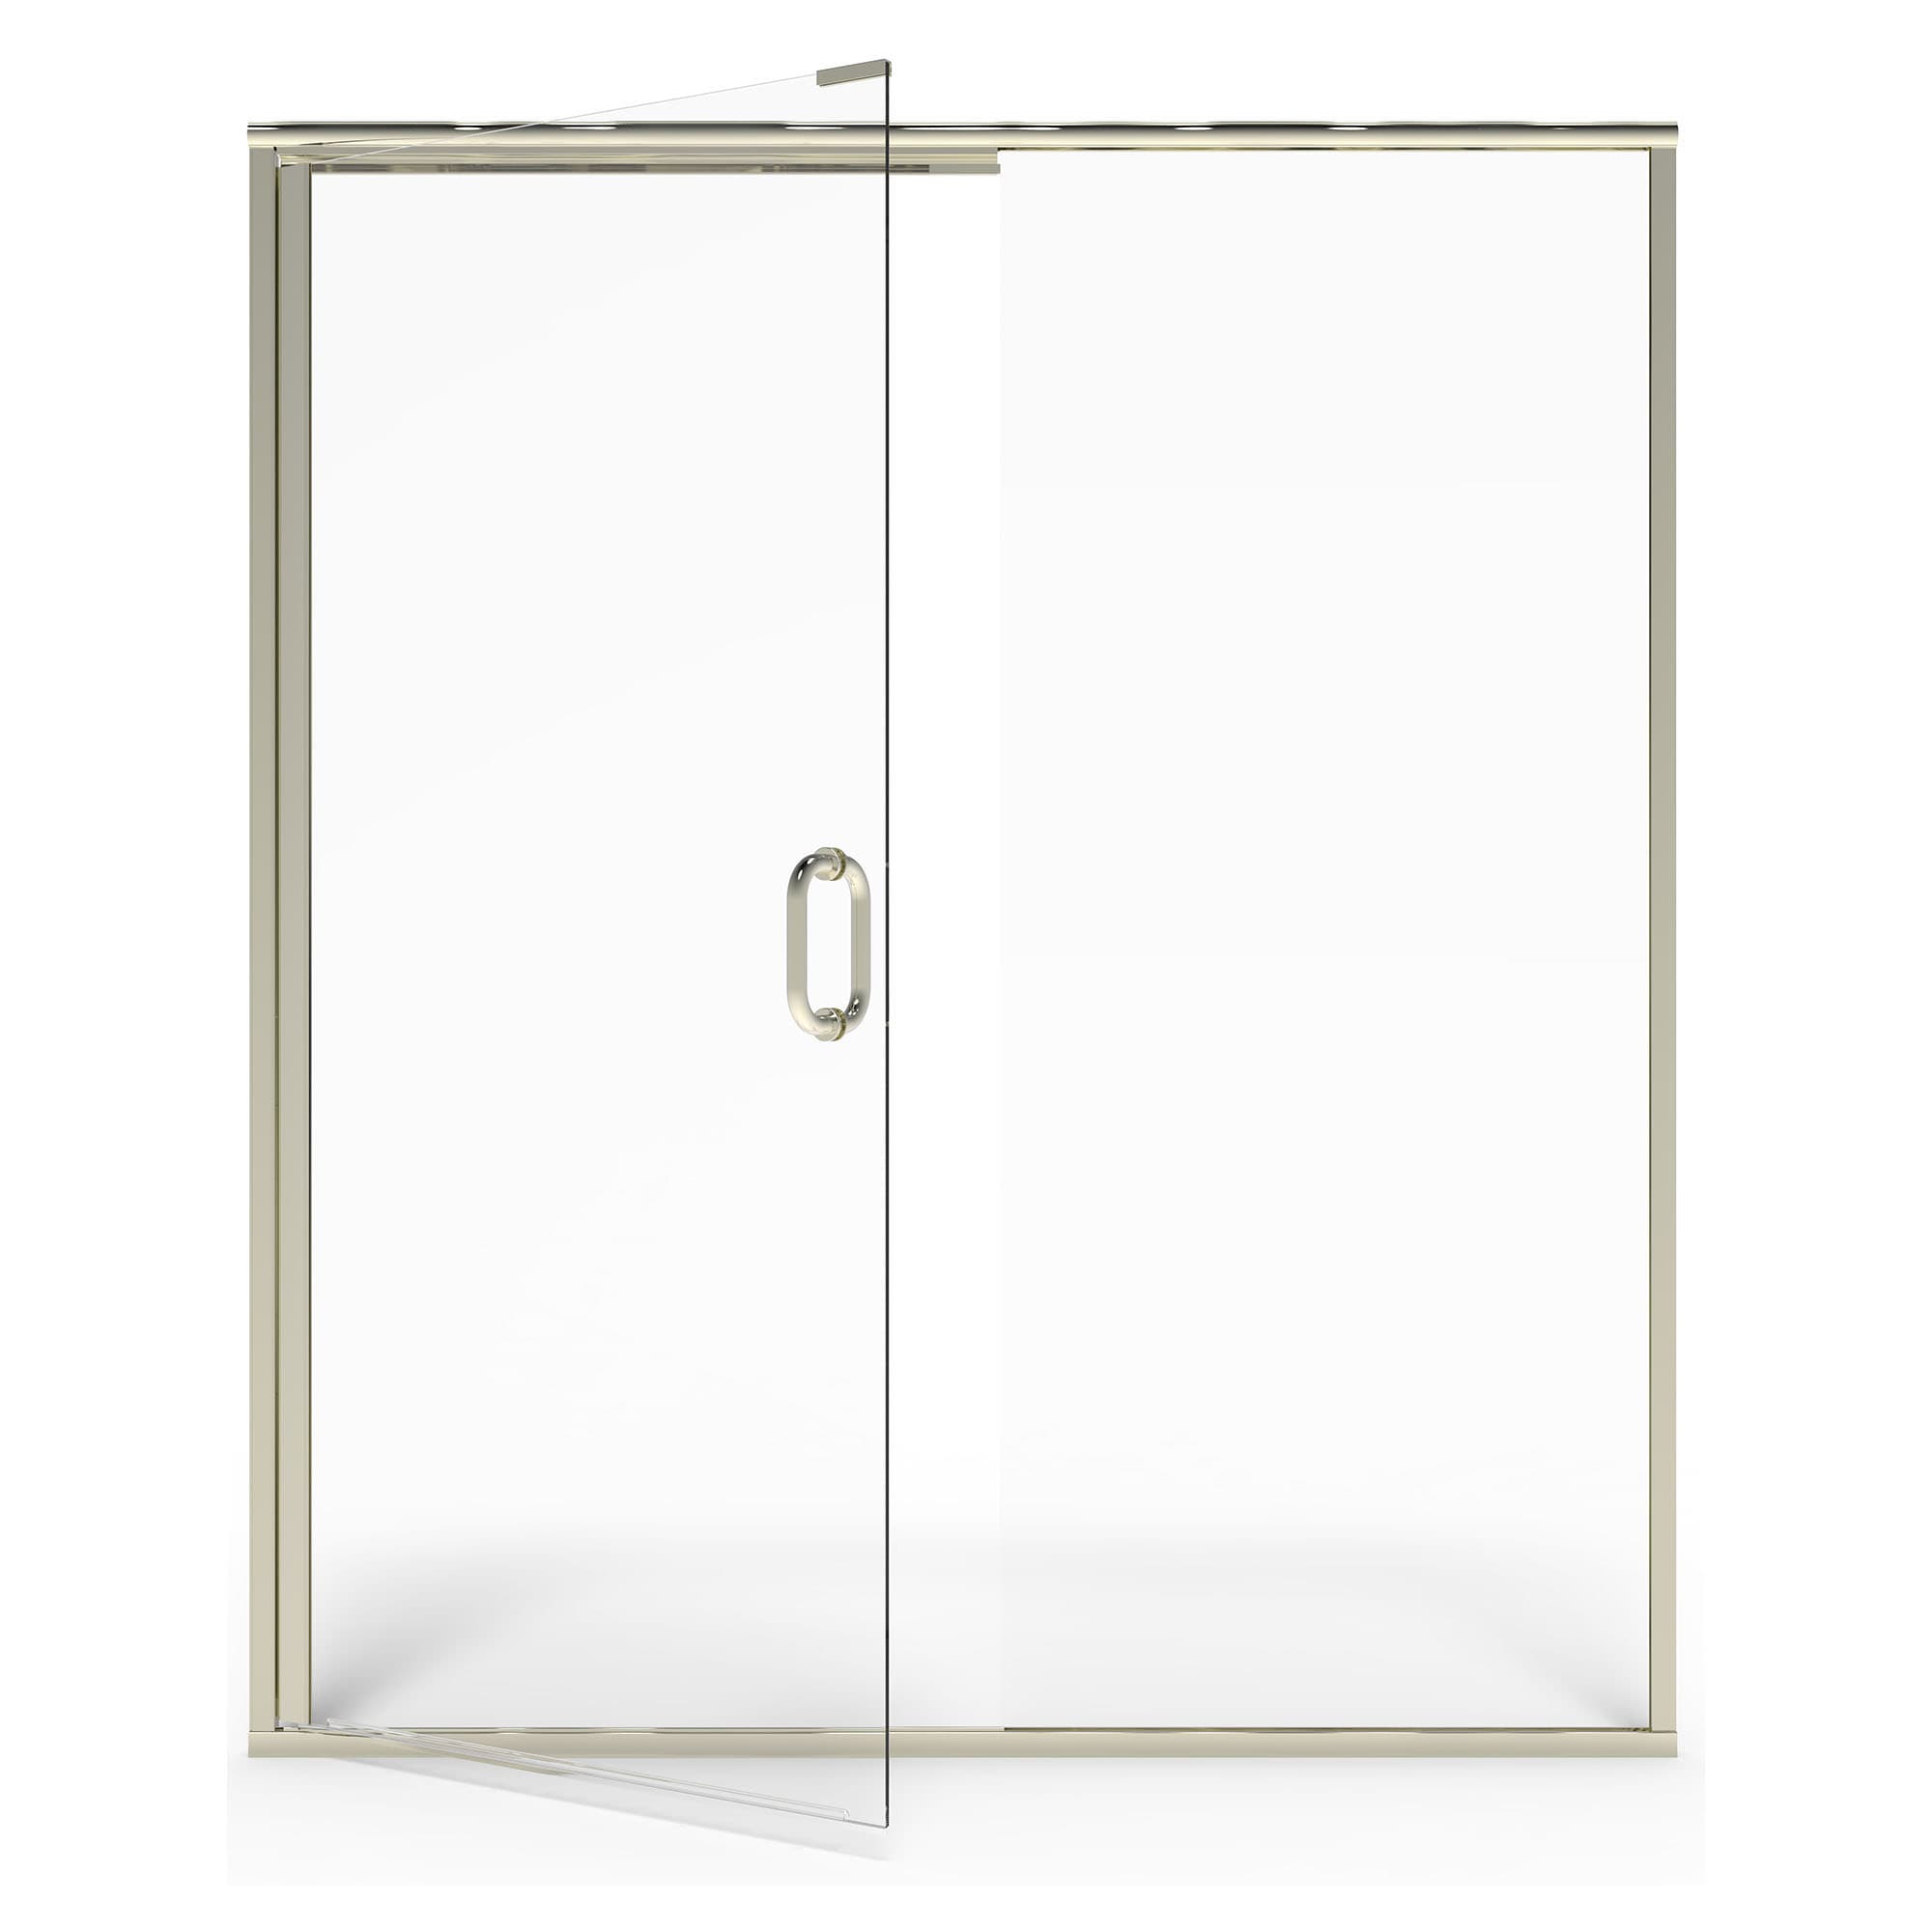 Brushed Nickel 56-in to 60-in x 76-in Semi-frameless Hinged Soft Close Shower Door in Gold | - American Standard AM00816400.006